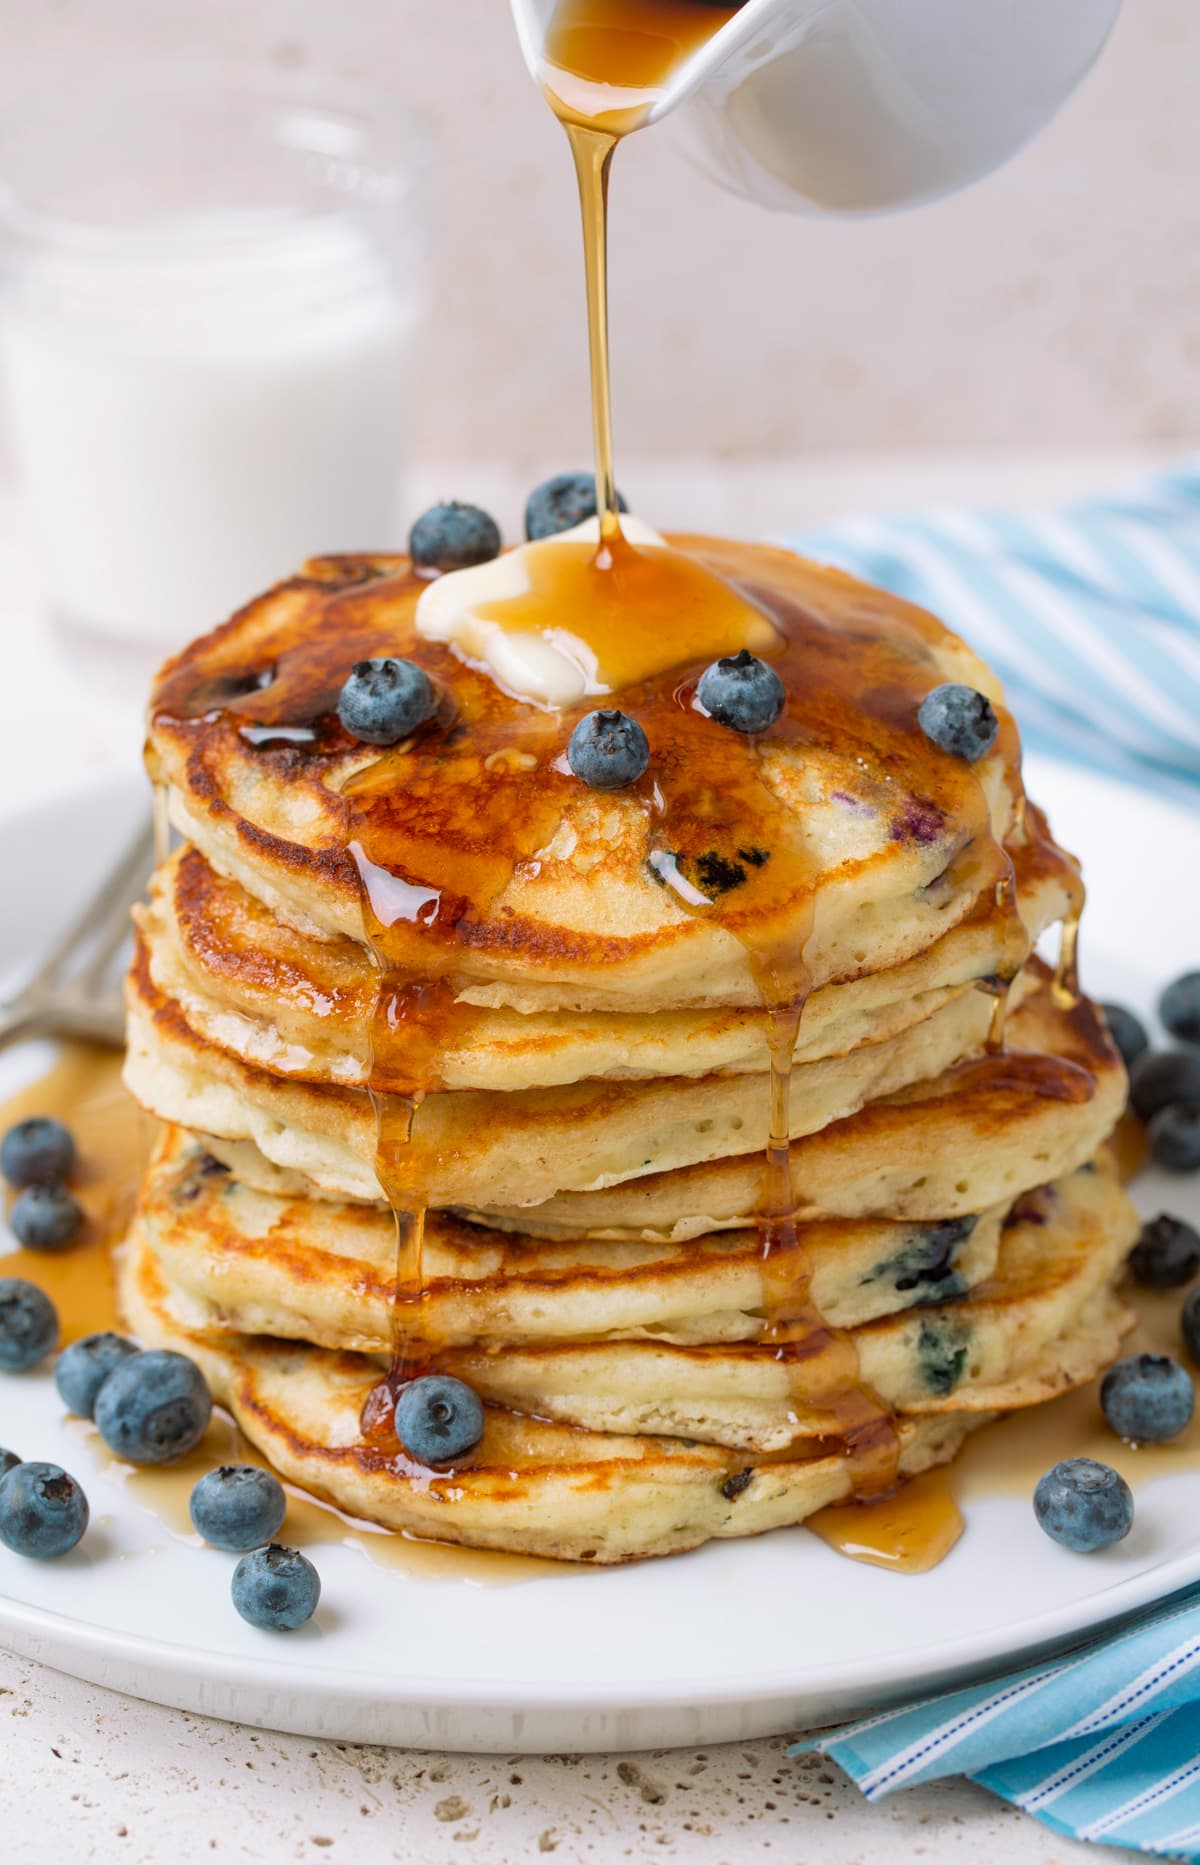 Fluffy Blueberry Pancakes (the Best!) - Cooking Classy